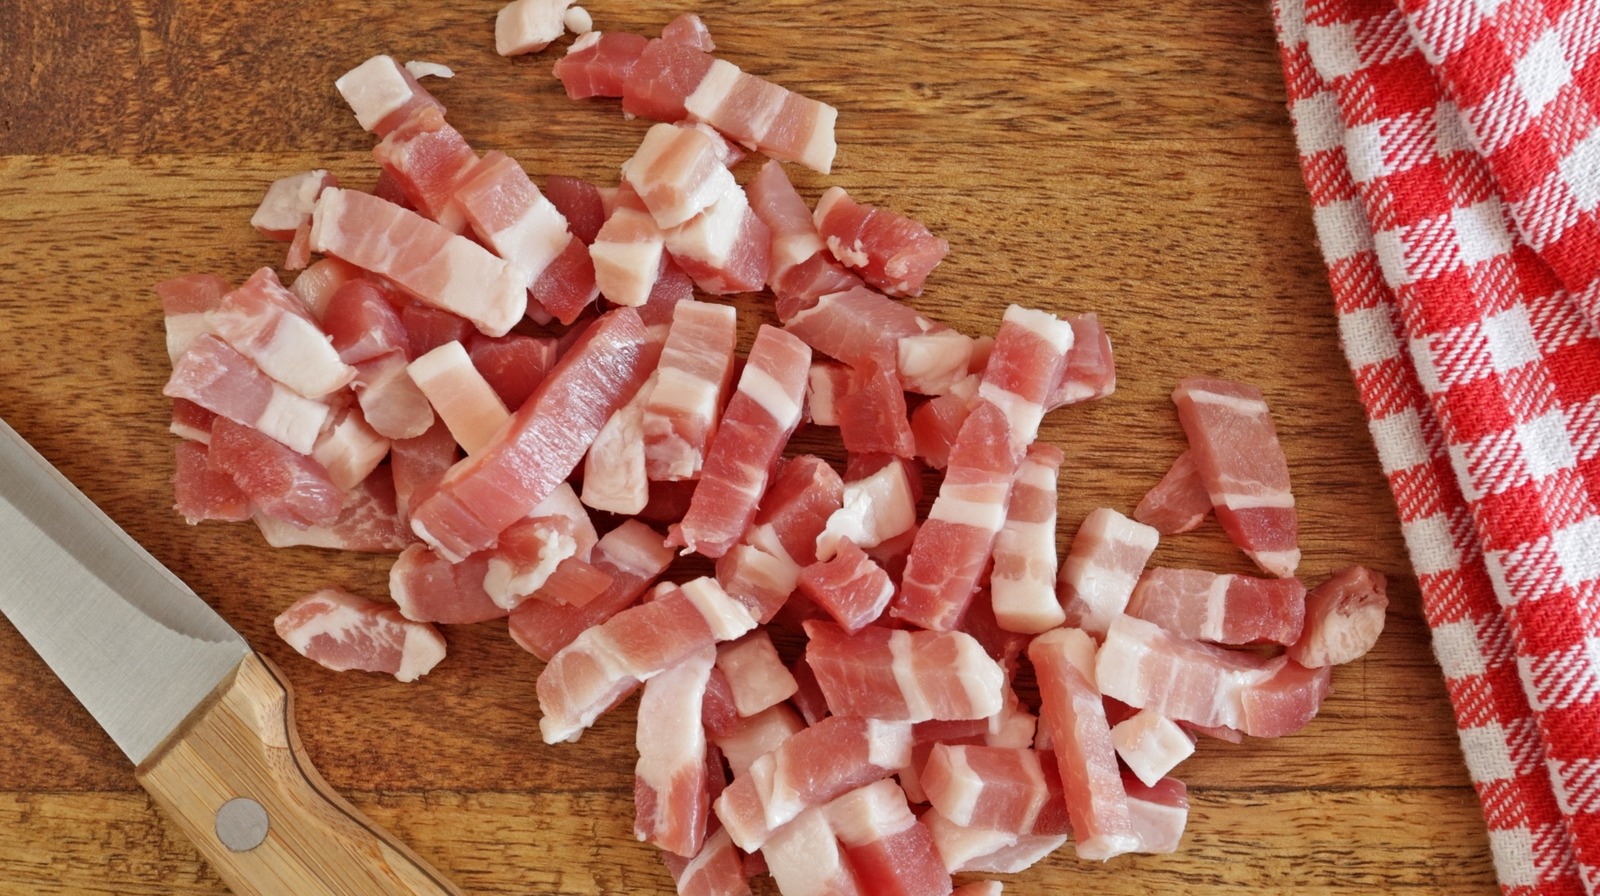 https://www.mashed.com/img/gallery/the-bite-sized-difference-between-bacon-and-lardon/l-intro-1689954889.jpg